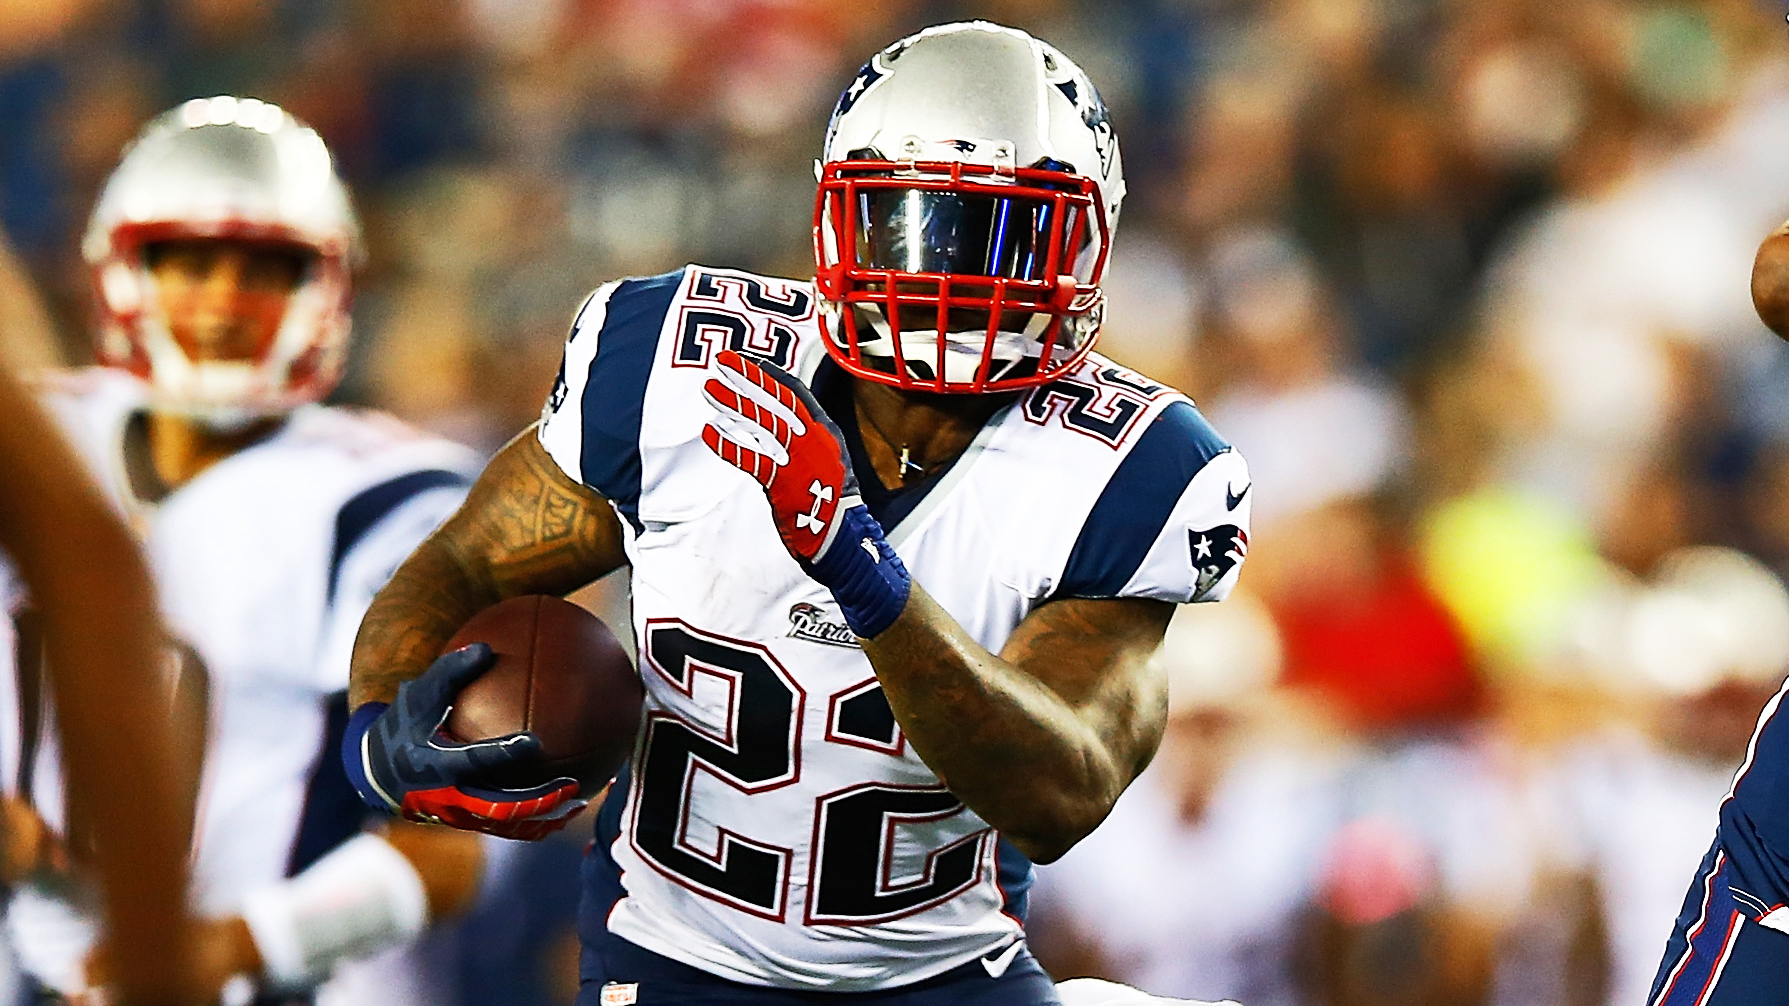 Stevan Ridley (Photo by Jared Wickerham/Getty Images)